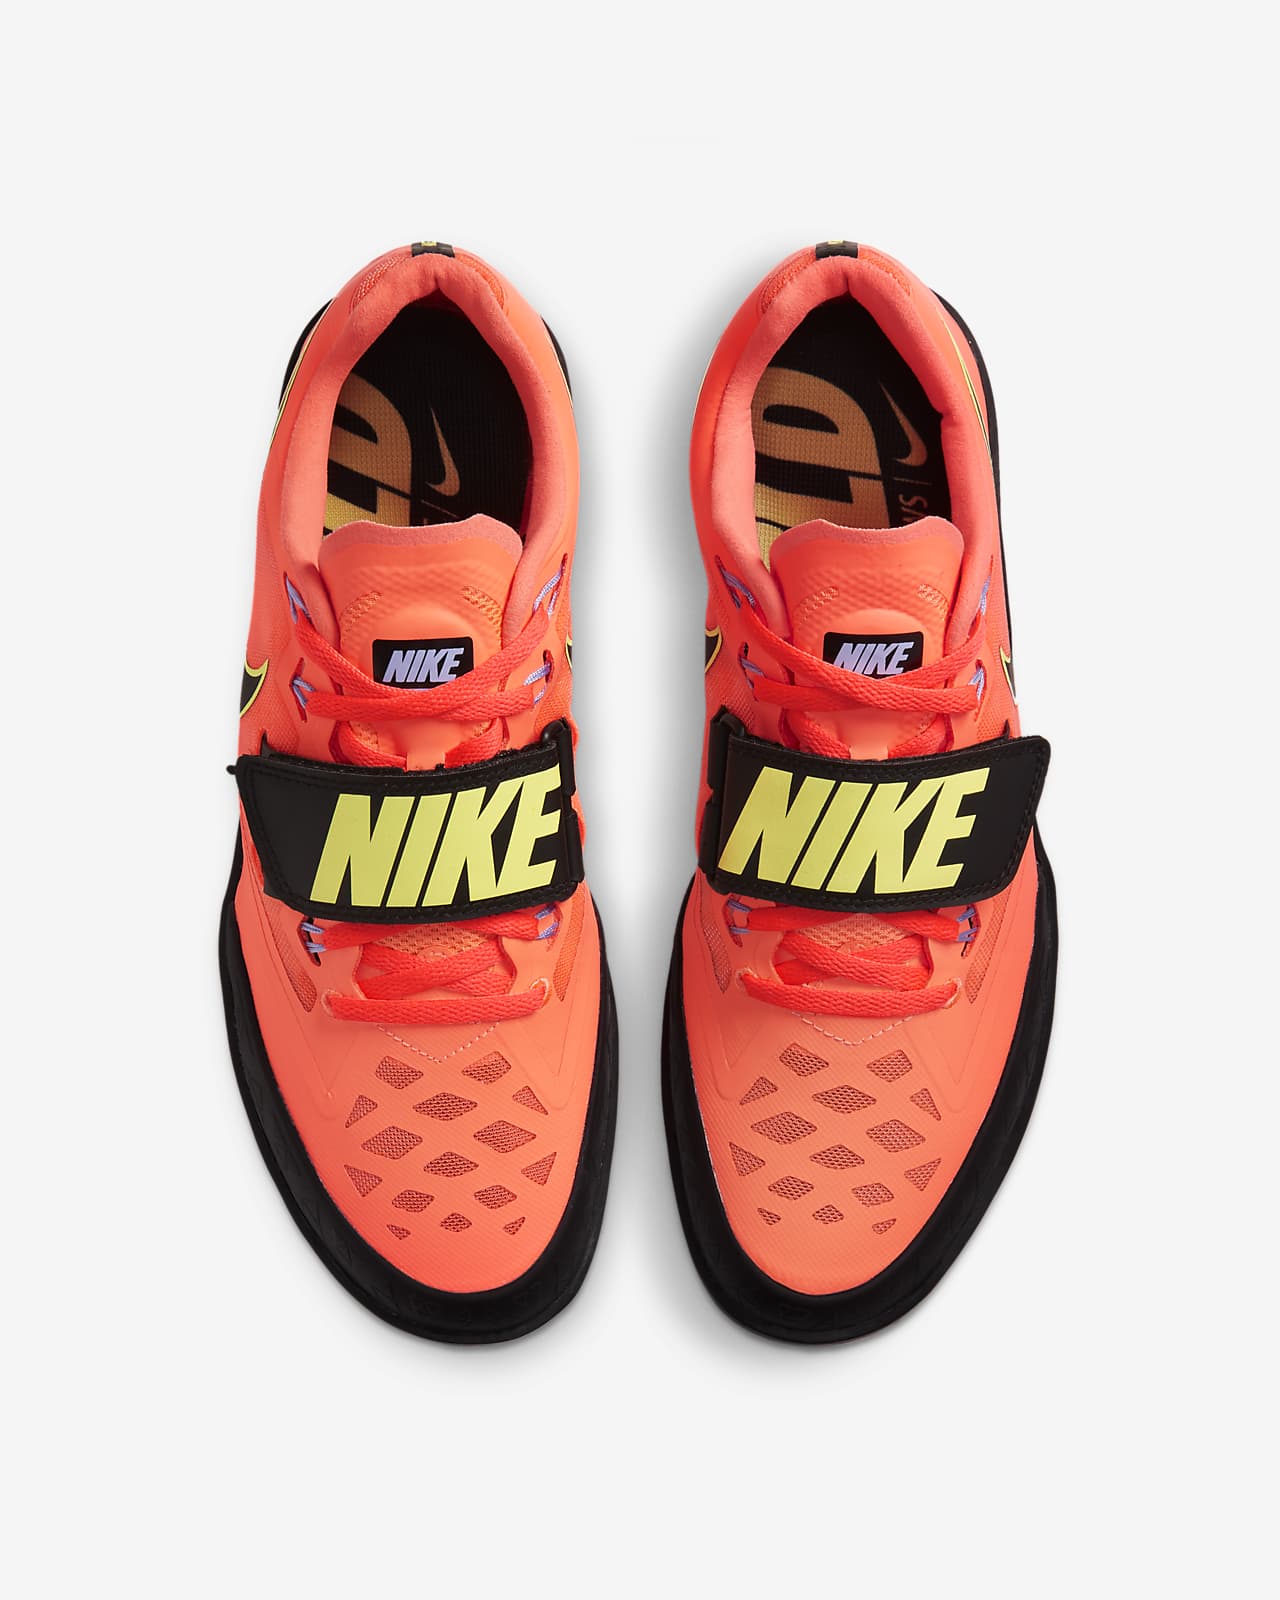 nike sd throwing shoes